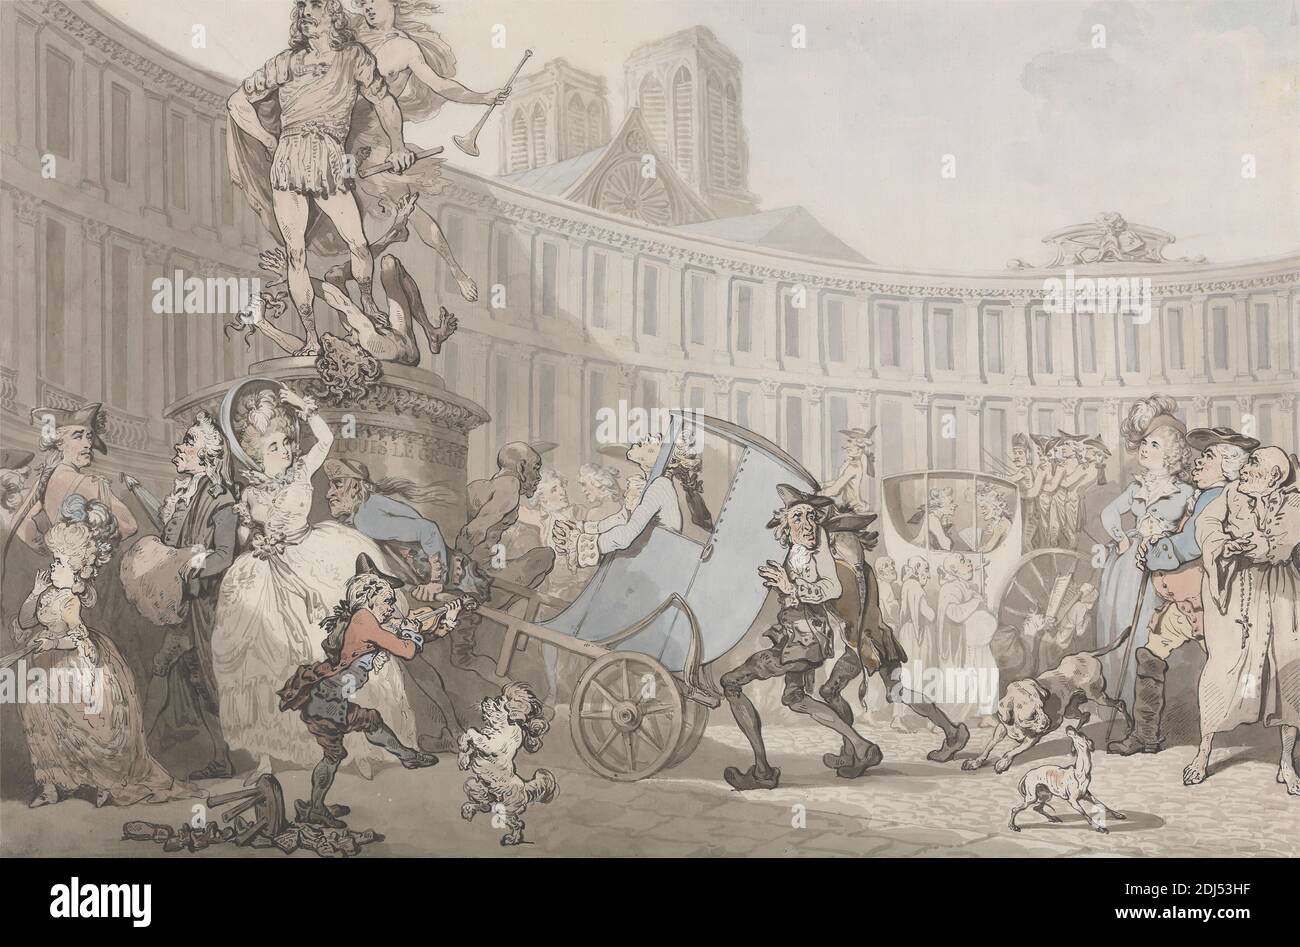 Place des Victoires, Paris, Thomas Rowlandson, 1756–1827, British, ca. 1783, Watercolor in pen and black ink over graphite on medium, moderately textured, cream antique laid paper, Sheet: 13 3/4 x 21 inches (34.9 x 53.4 cm) and Image: 13 3/4 x 21 inches (34.9 x 53.4 cm), architectural subject, building, carriages, carts, cathedral, celebration, chaos, cityscape, costume, dogs (animals), figures, French, genre subject, Grand Tour, humor, monk, music, musician, plaza, satire, satirical, sculpture, snakes, statue, street, victory, violin, violinist, walking, Europe, France, Notre-Dame, Paris Stock Photo